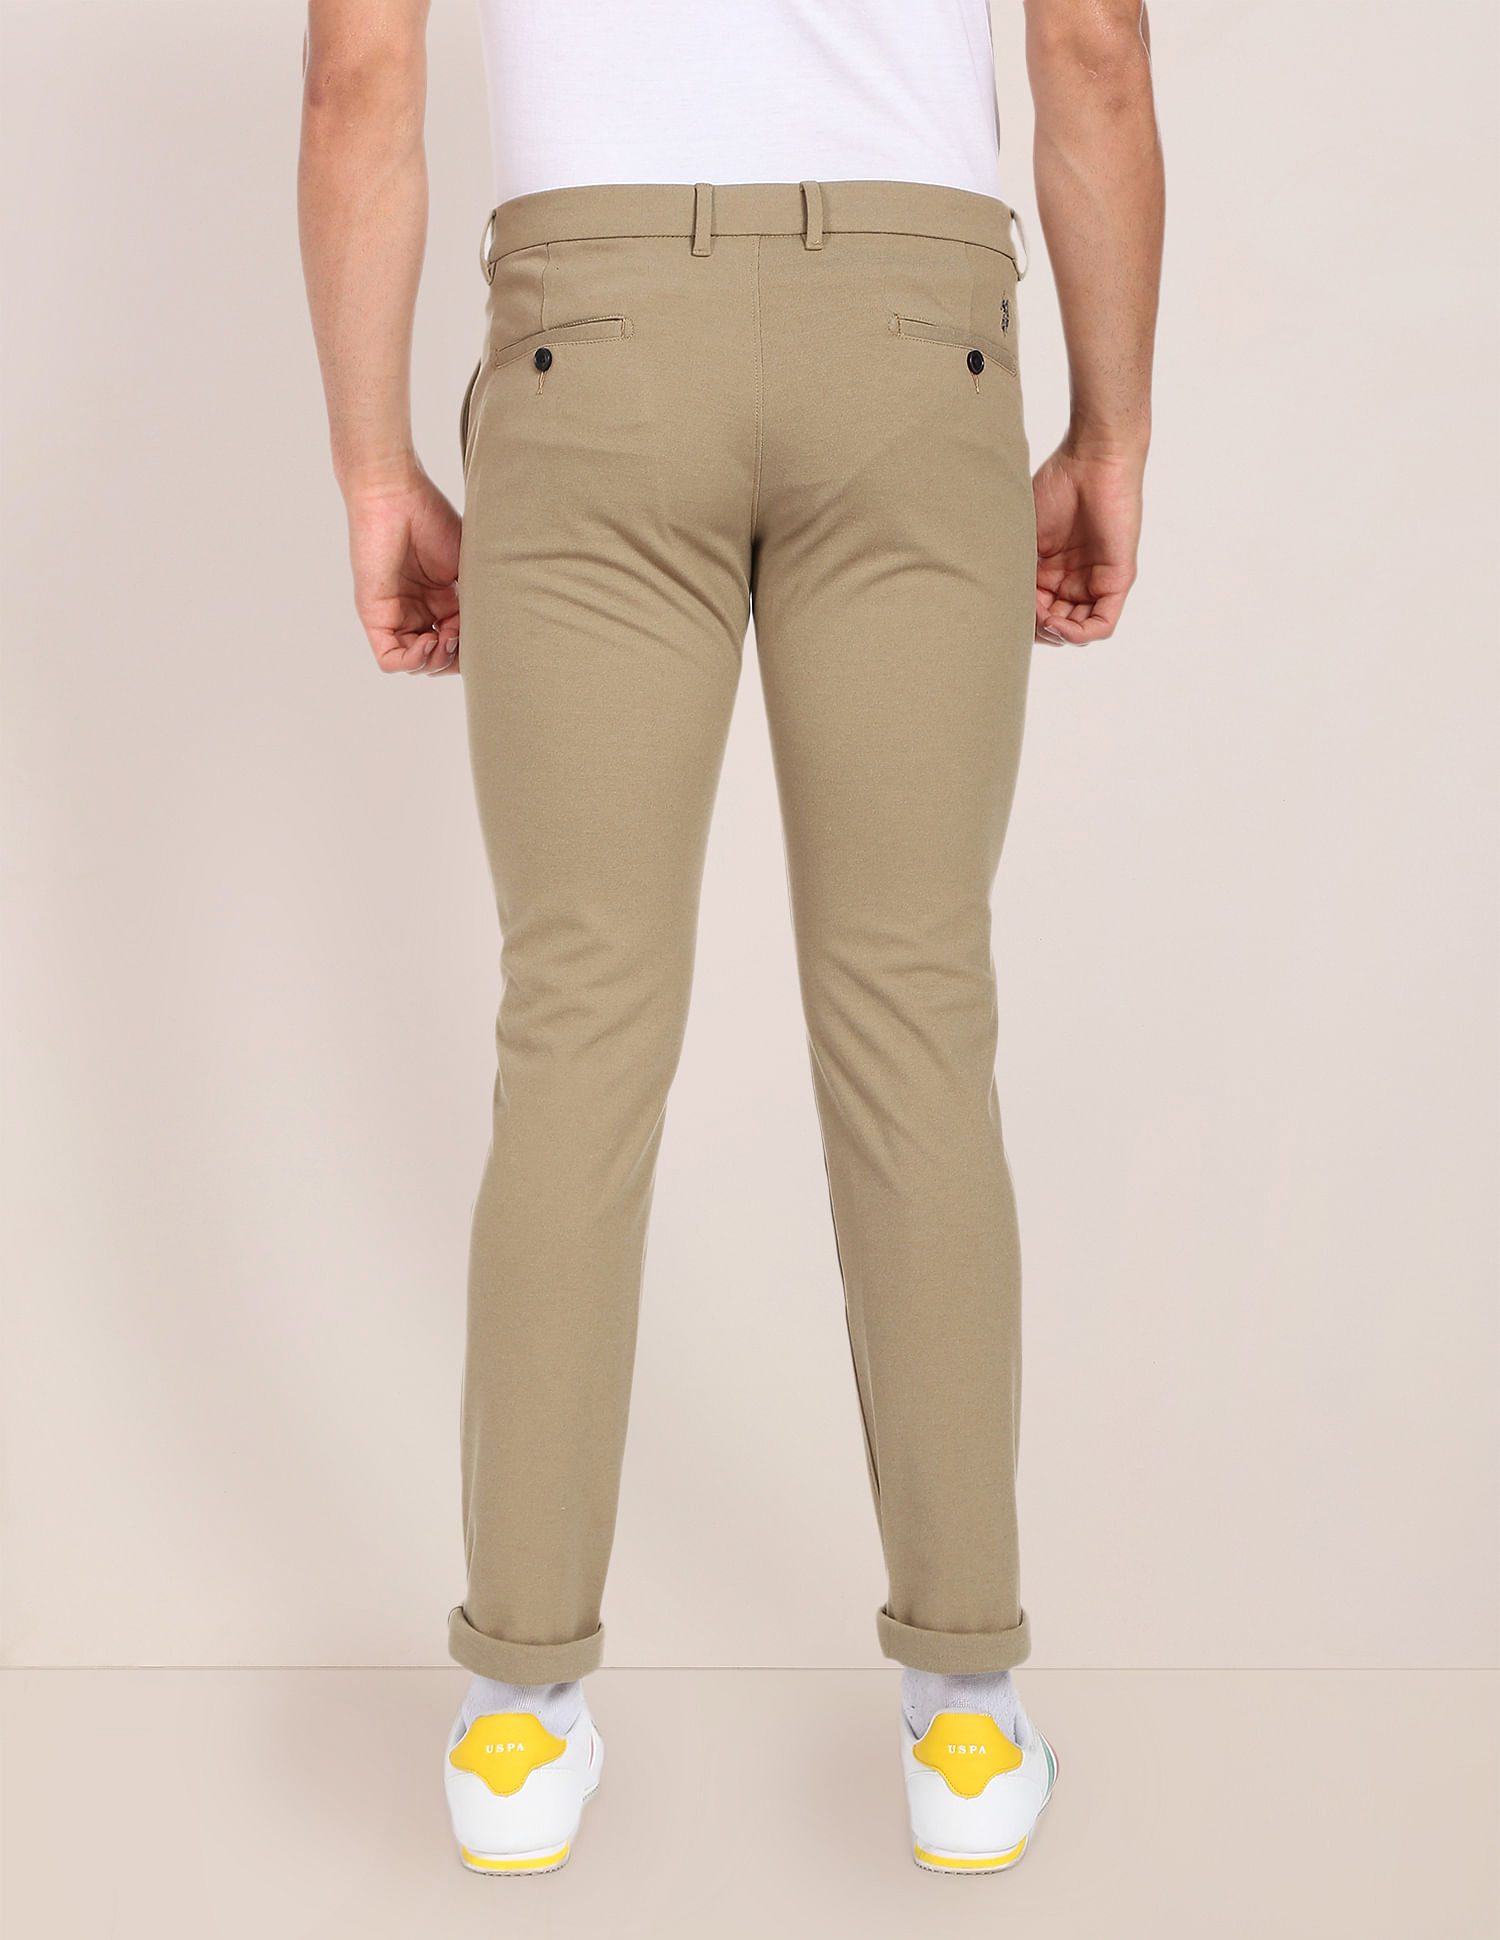 Buy USPA Tailored Men Beige Slim Fit Flat Front Formal Trousers - NNNOW.com